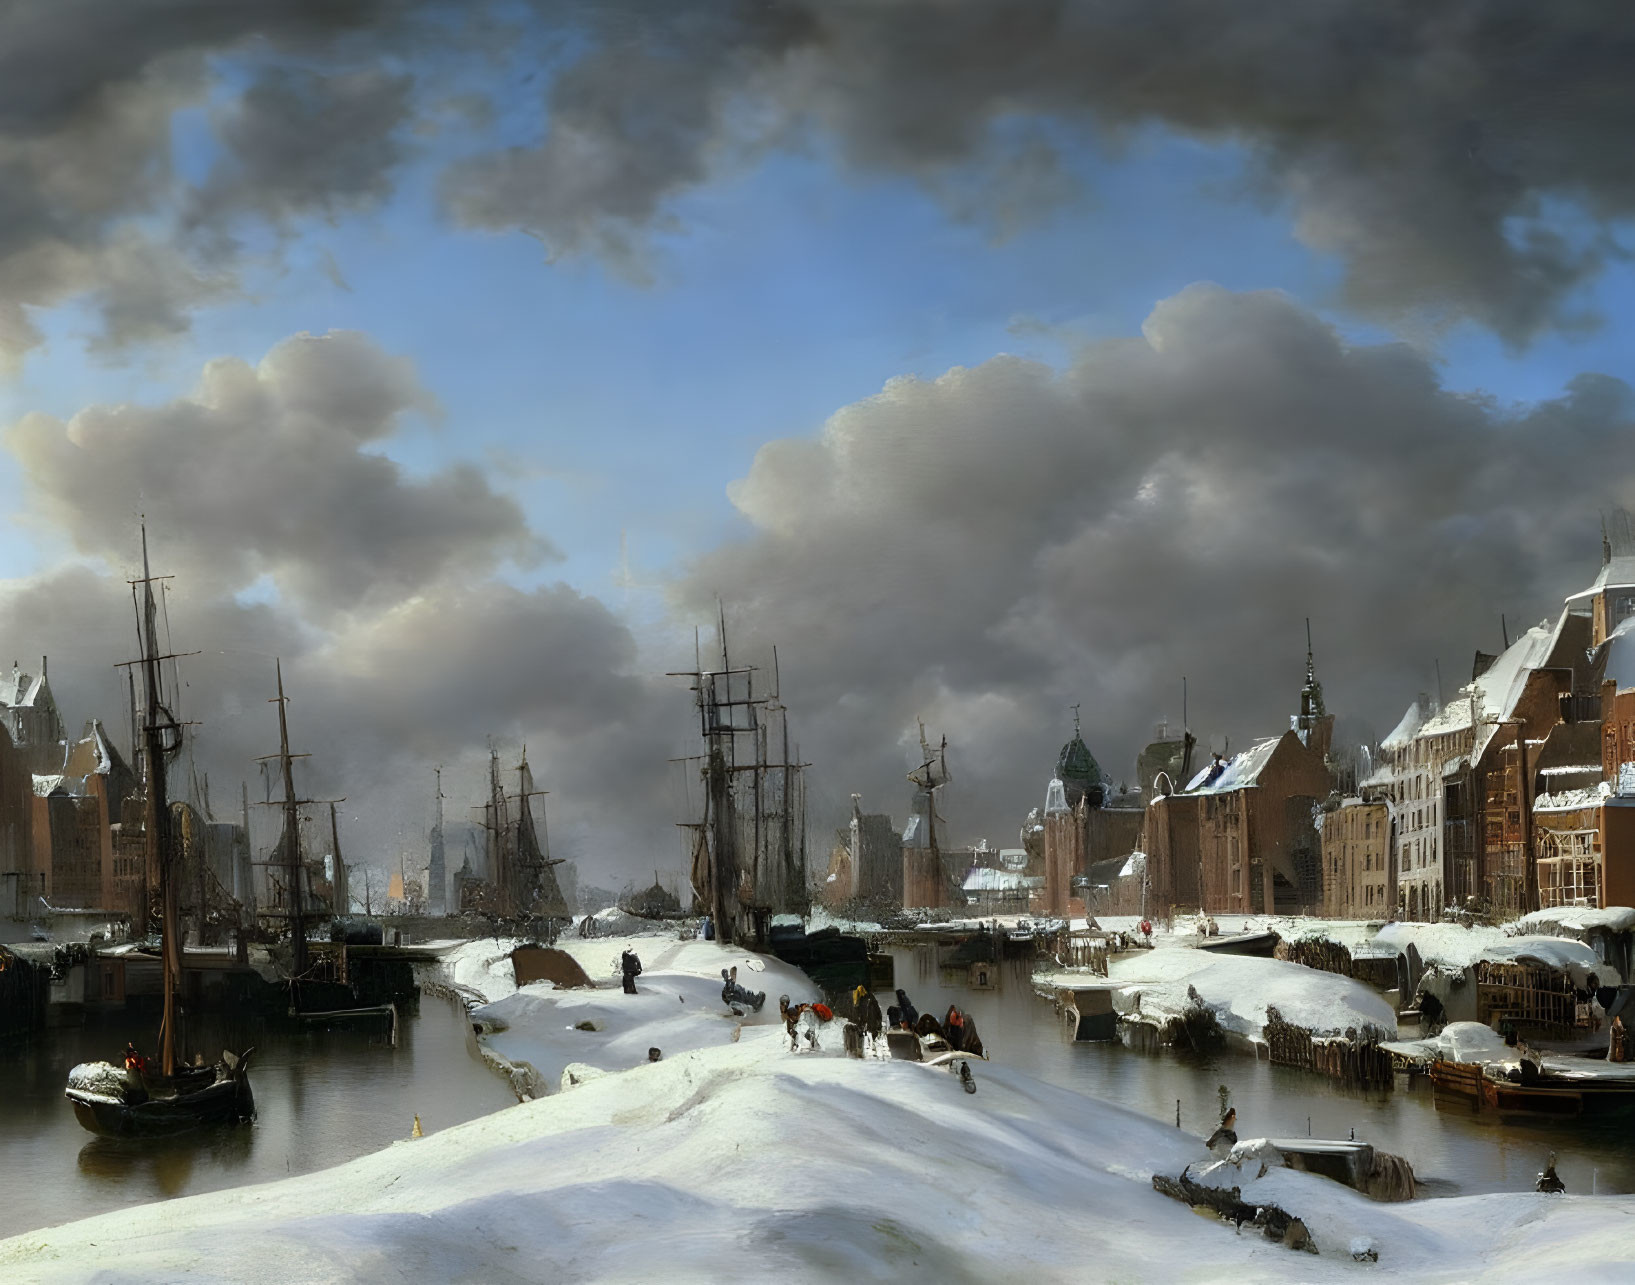 Snow-covered Dutch harbor with ships, buildings, people on ice under dramatic sky